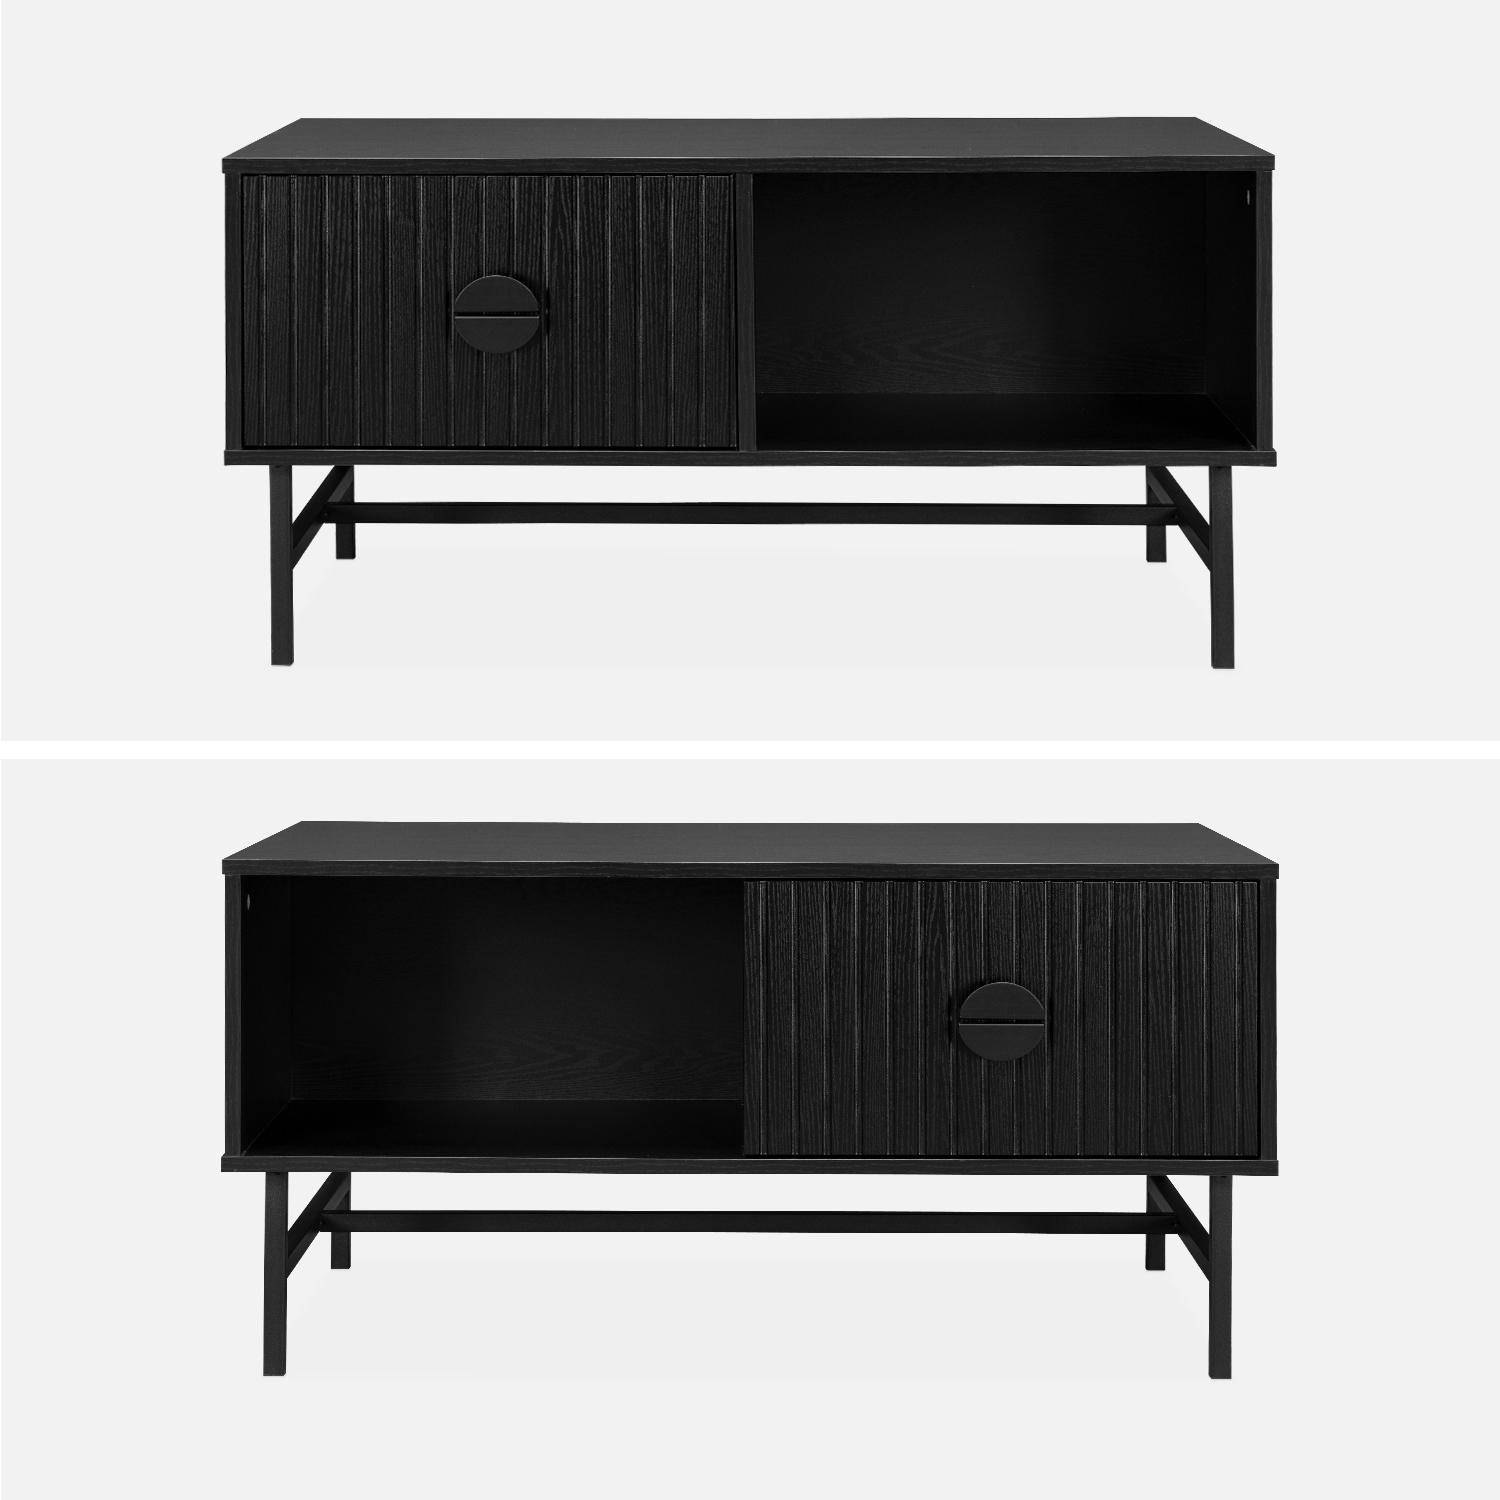 Coffee table with one drawer and one storage nook, ridged effect, industrial style, 100x59x50.2cm - Bazalt - Black,sweeek,Photo5